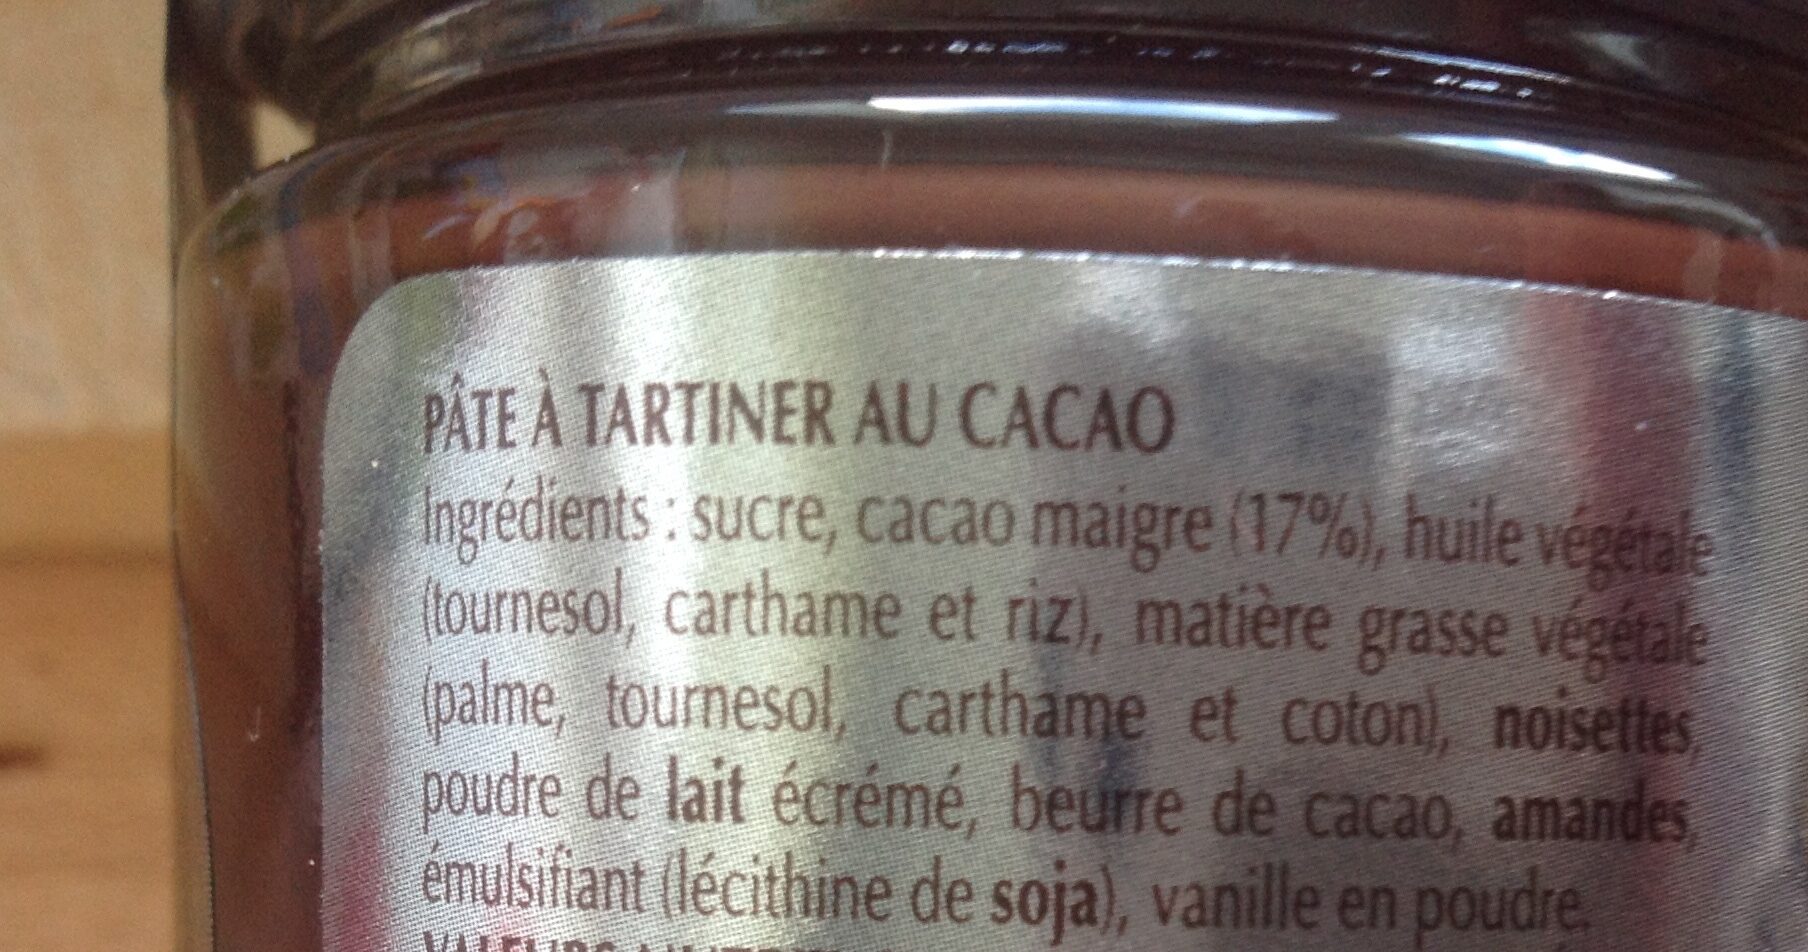 Pate a tartiner cacao - Ingredients - fr